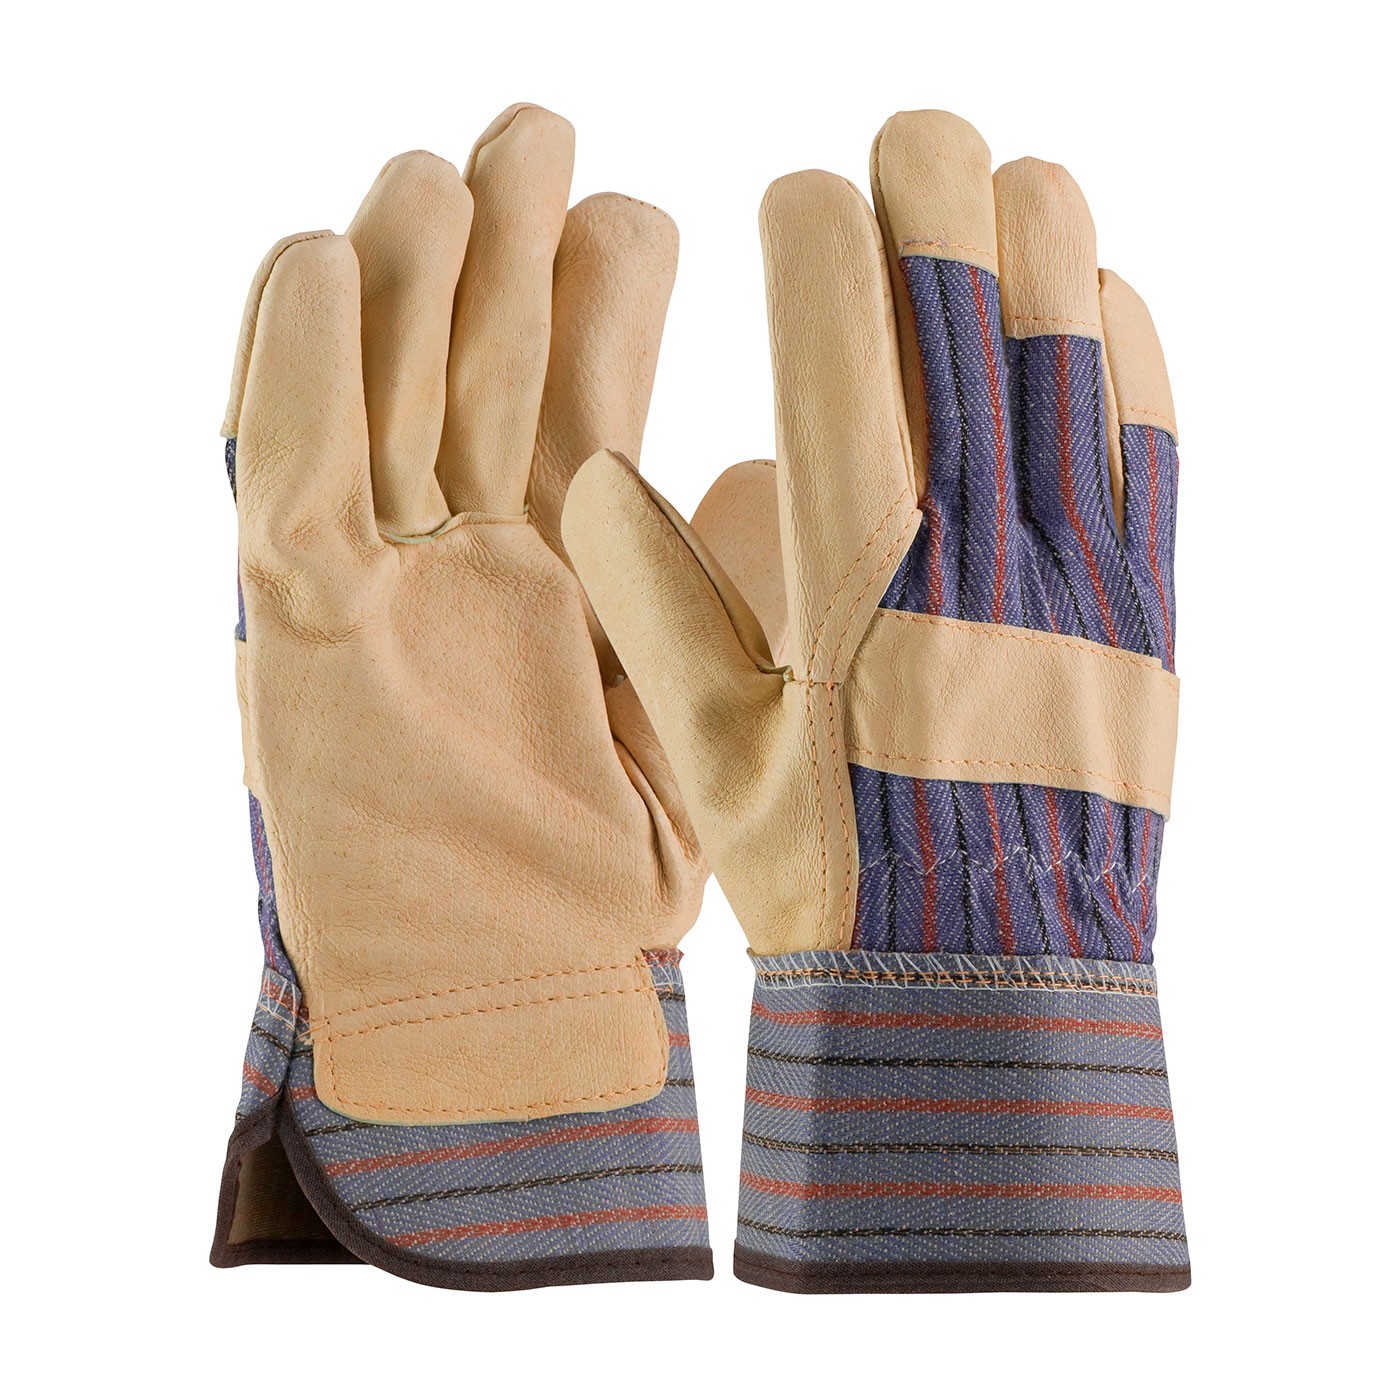 Posi-Therm® Pigskin Leather Palm Glove with Fabric Back & Positherm® Lining - Safety Cuff  (#5555)